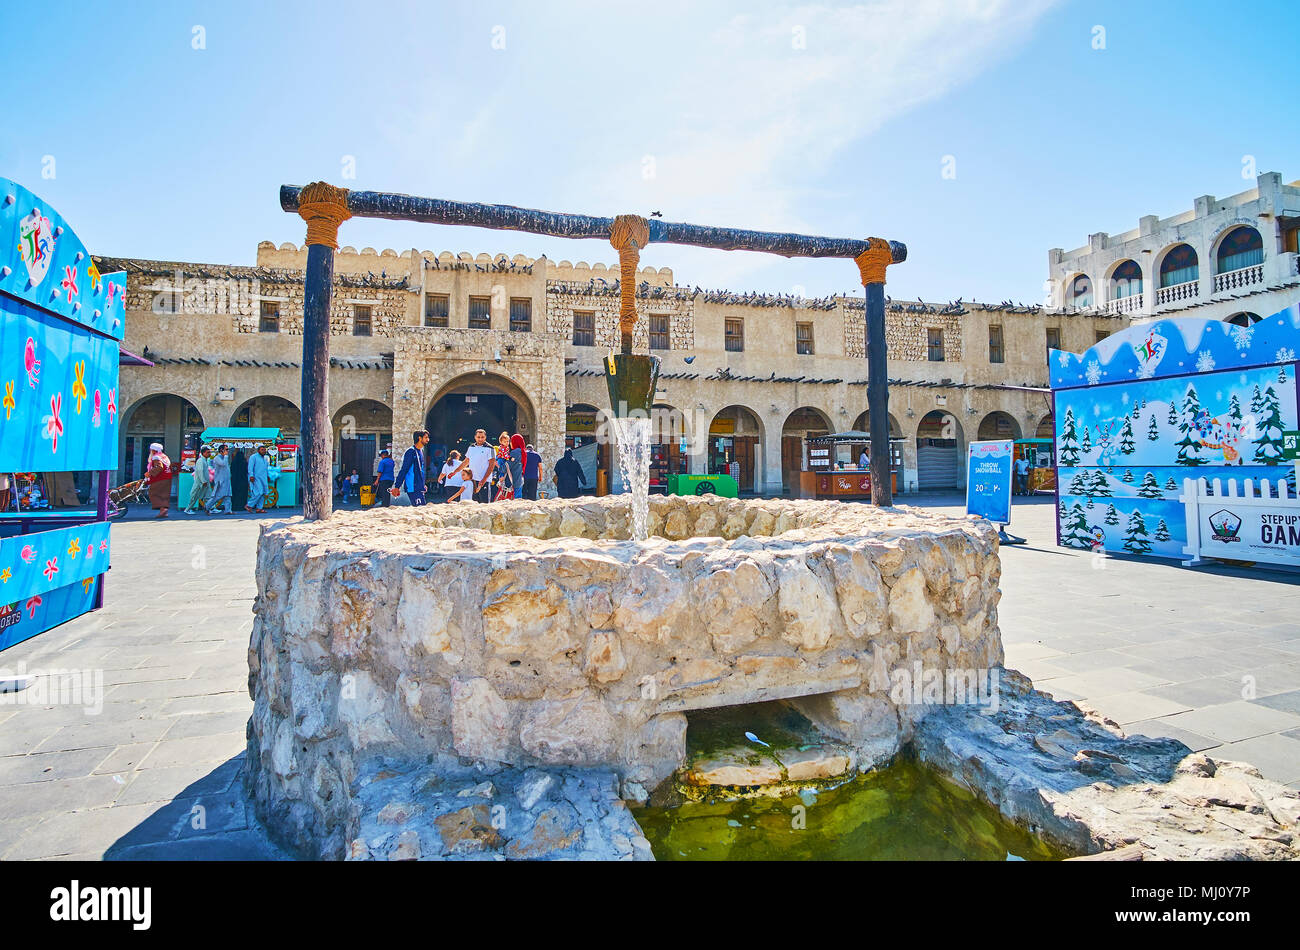 DOHA, QATAR - FEBRUARY 13, 2018: The old well fountain in front of Souq Waqif buildings, located in Al Souq district, on February 13 in Doha. Stock Photo